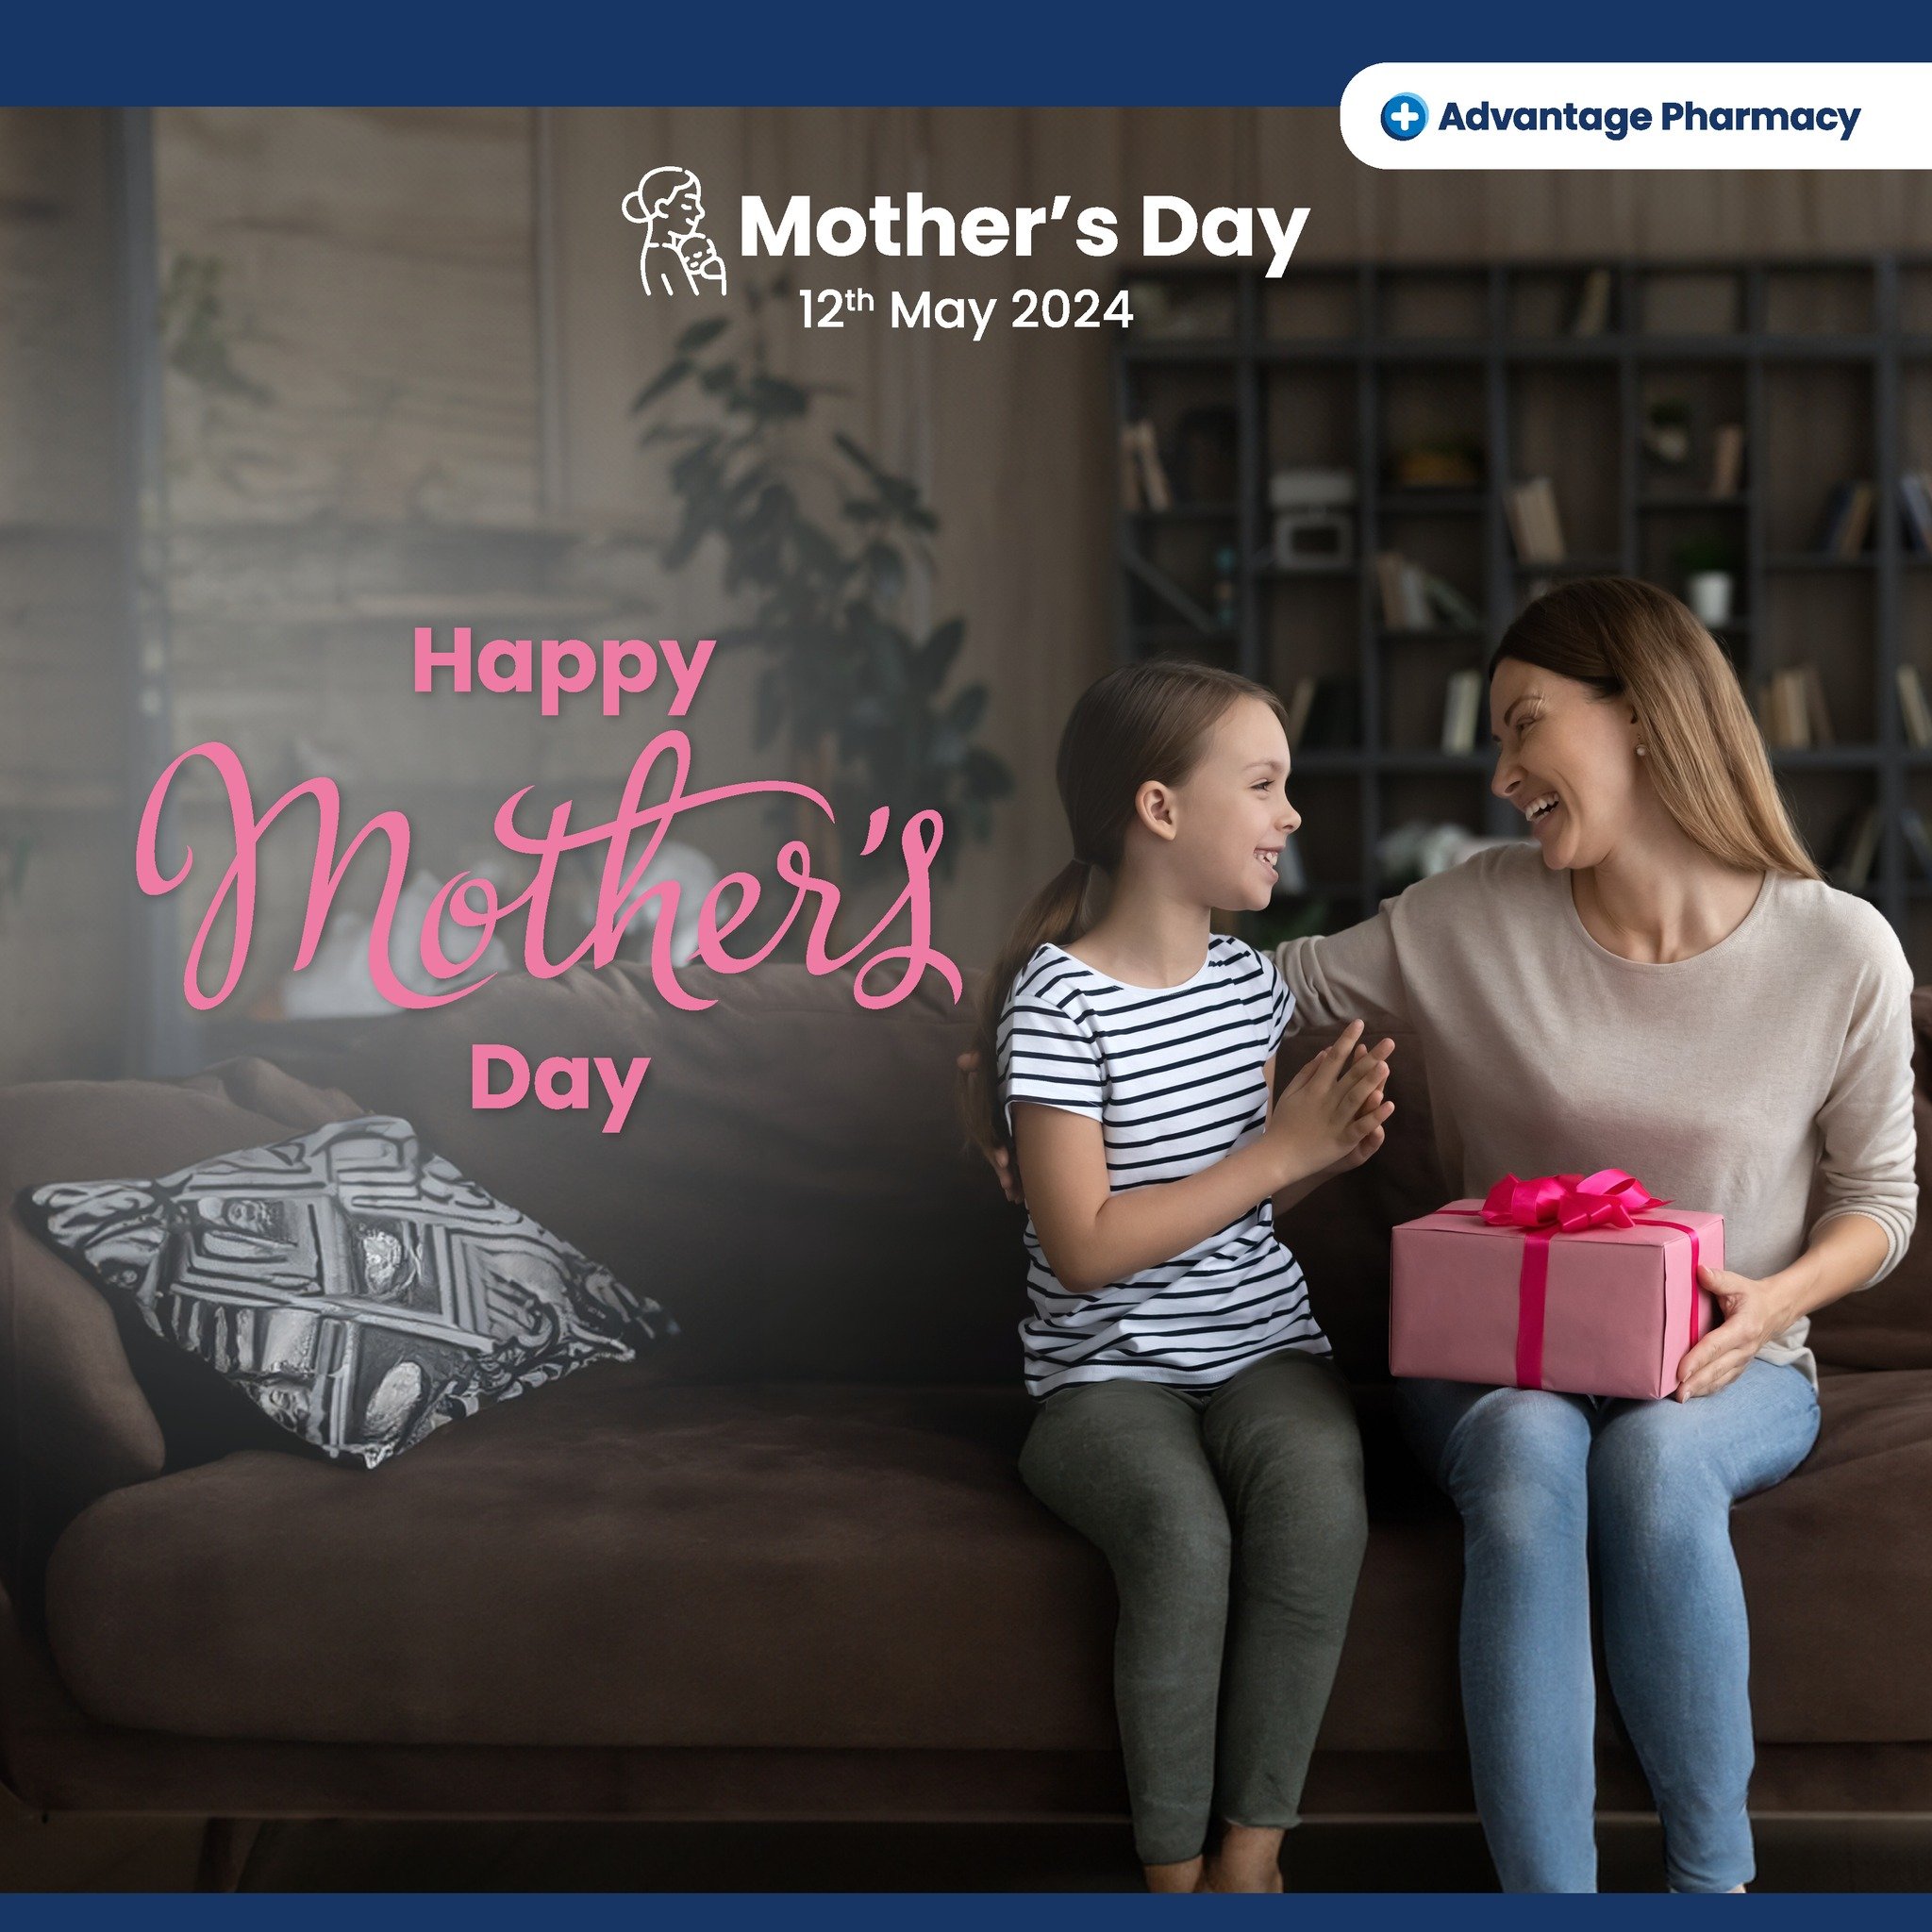 Wishing a very happy Mother's Day to all motherly figures in our community today. Your endless love and dedication never go unnoticed.
If you are celebrating someone today, let us know who it is in the comments and why you appreciate them ❤
#mothersd